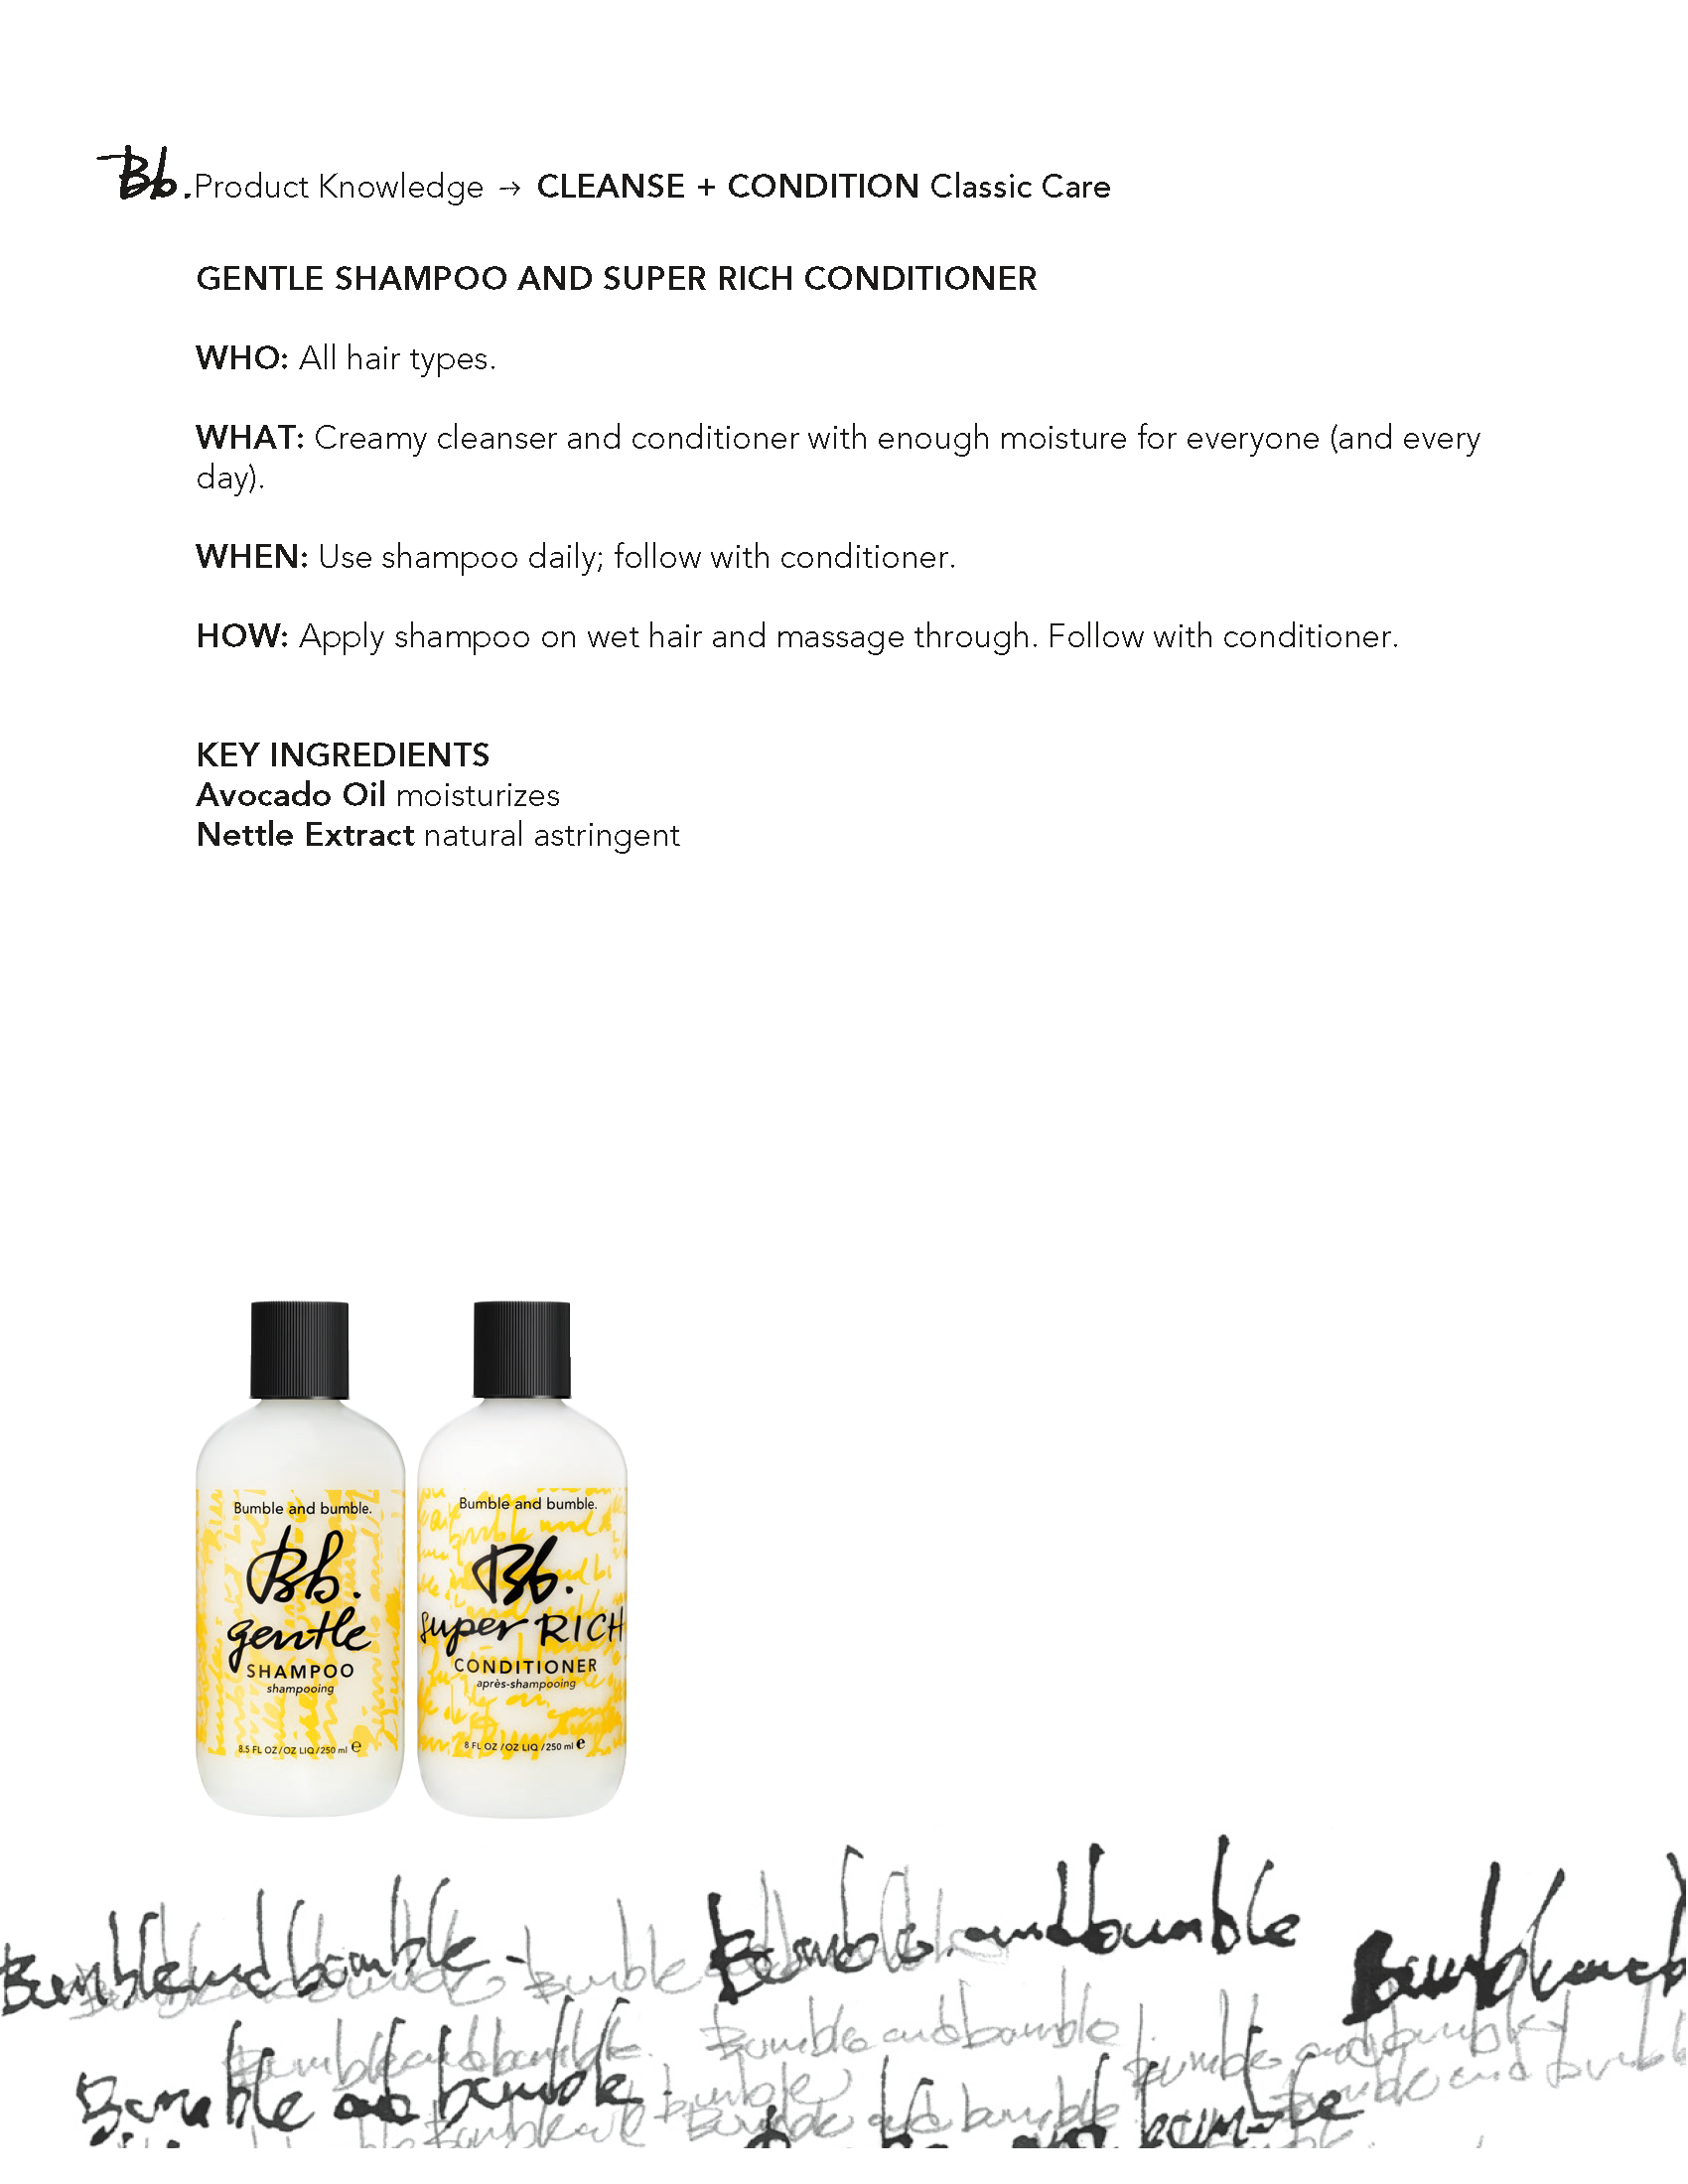 2021 Bumble Collections PK Notes for Salons - FULL LINE - Blonde + Ultra + Curl (1)_Page_61.png